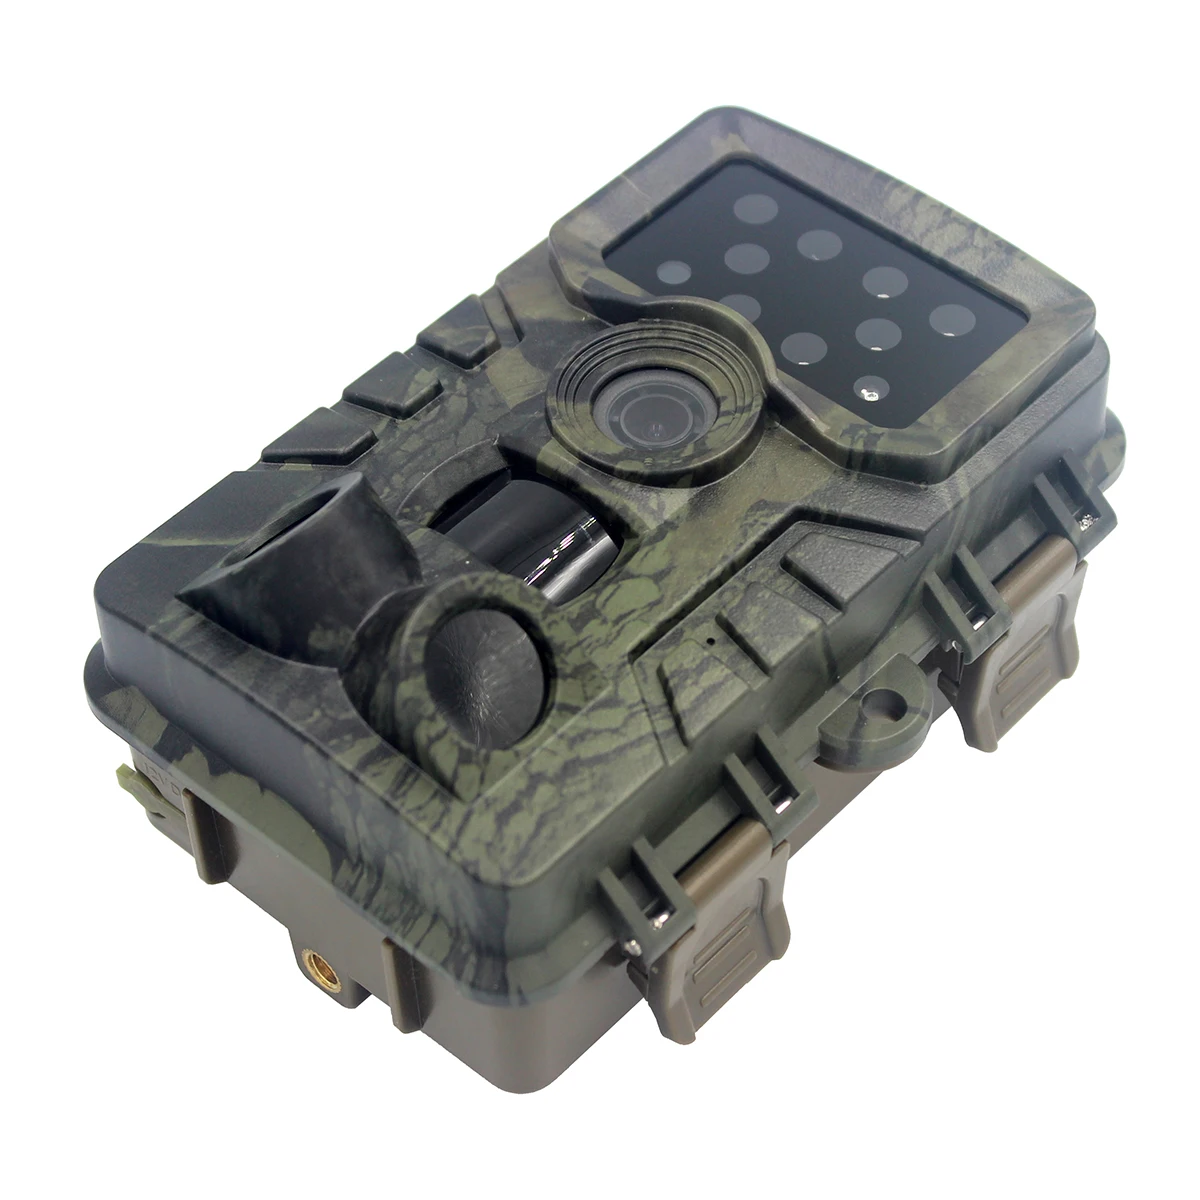 

Outdoor Ip66 1080P HD 20Mp Game Camera Fototrap PR700 2.0 Inch Display Trail Camera Hunting For Wildlife Monitoring